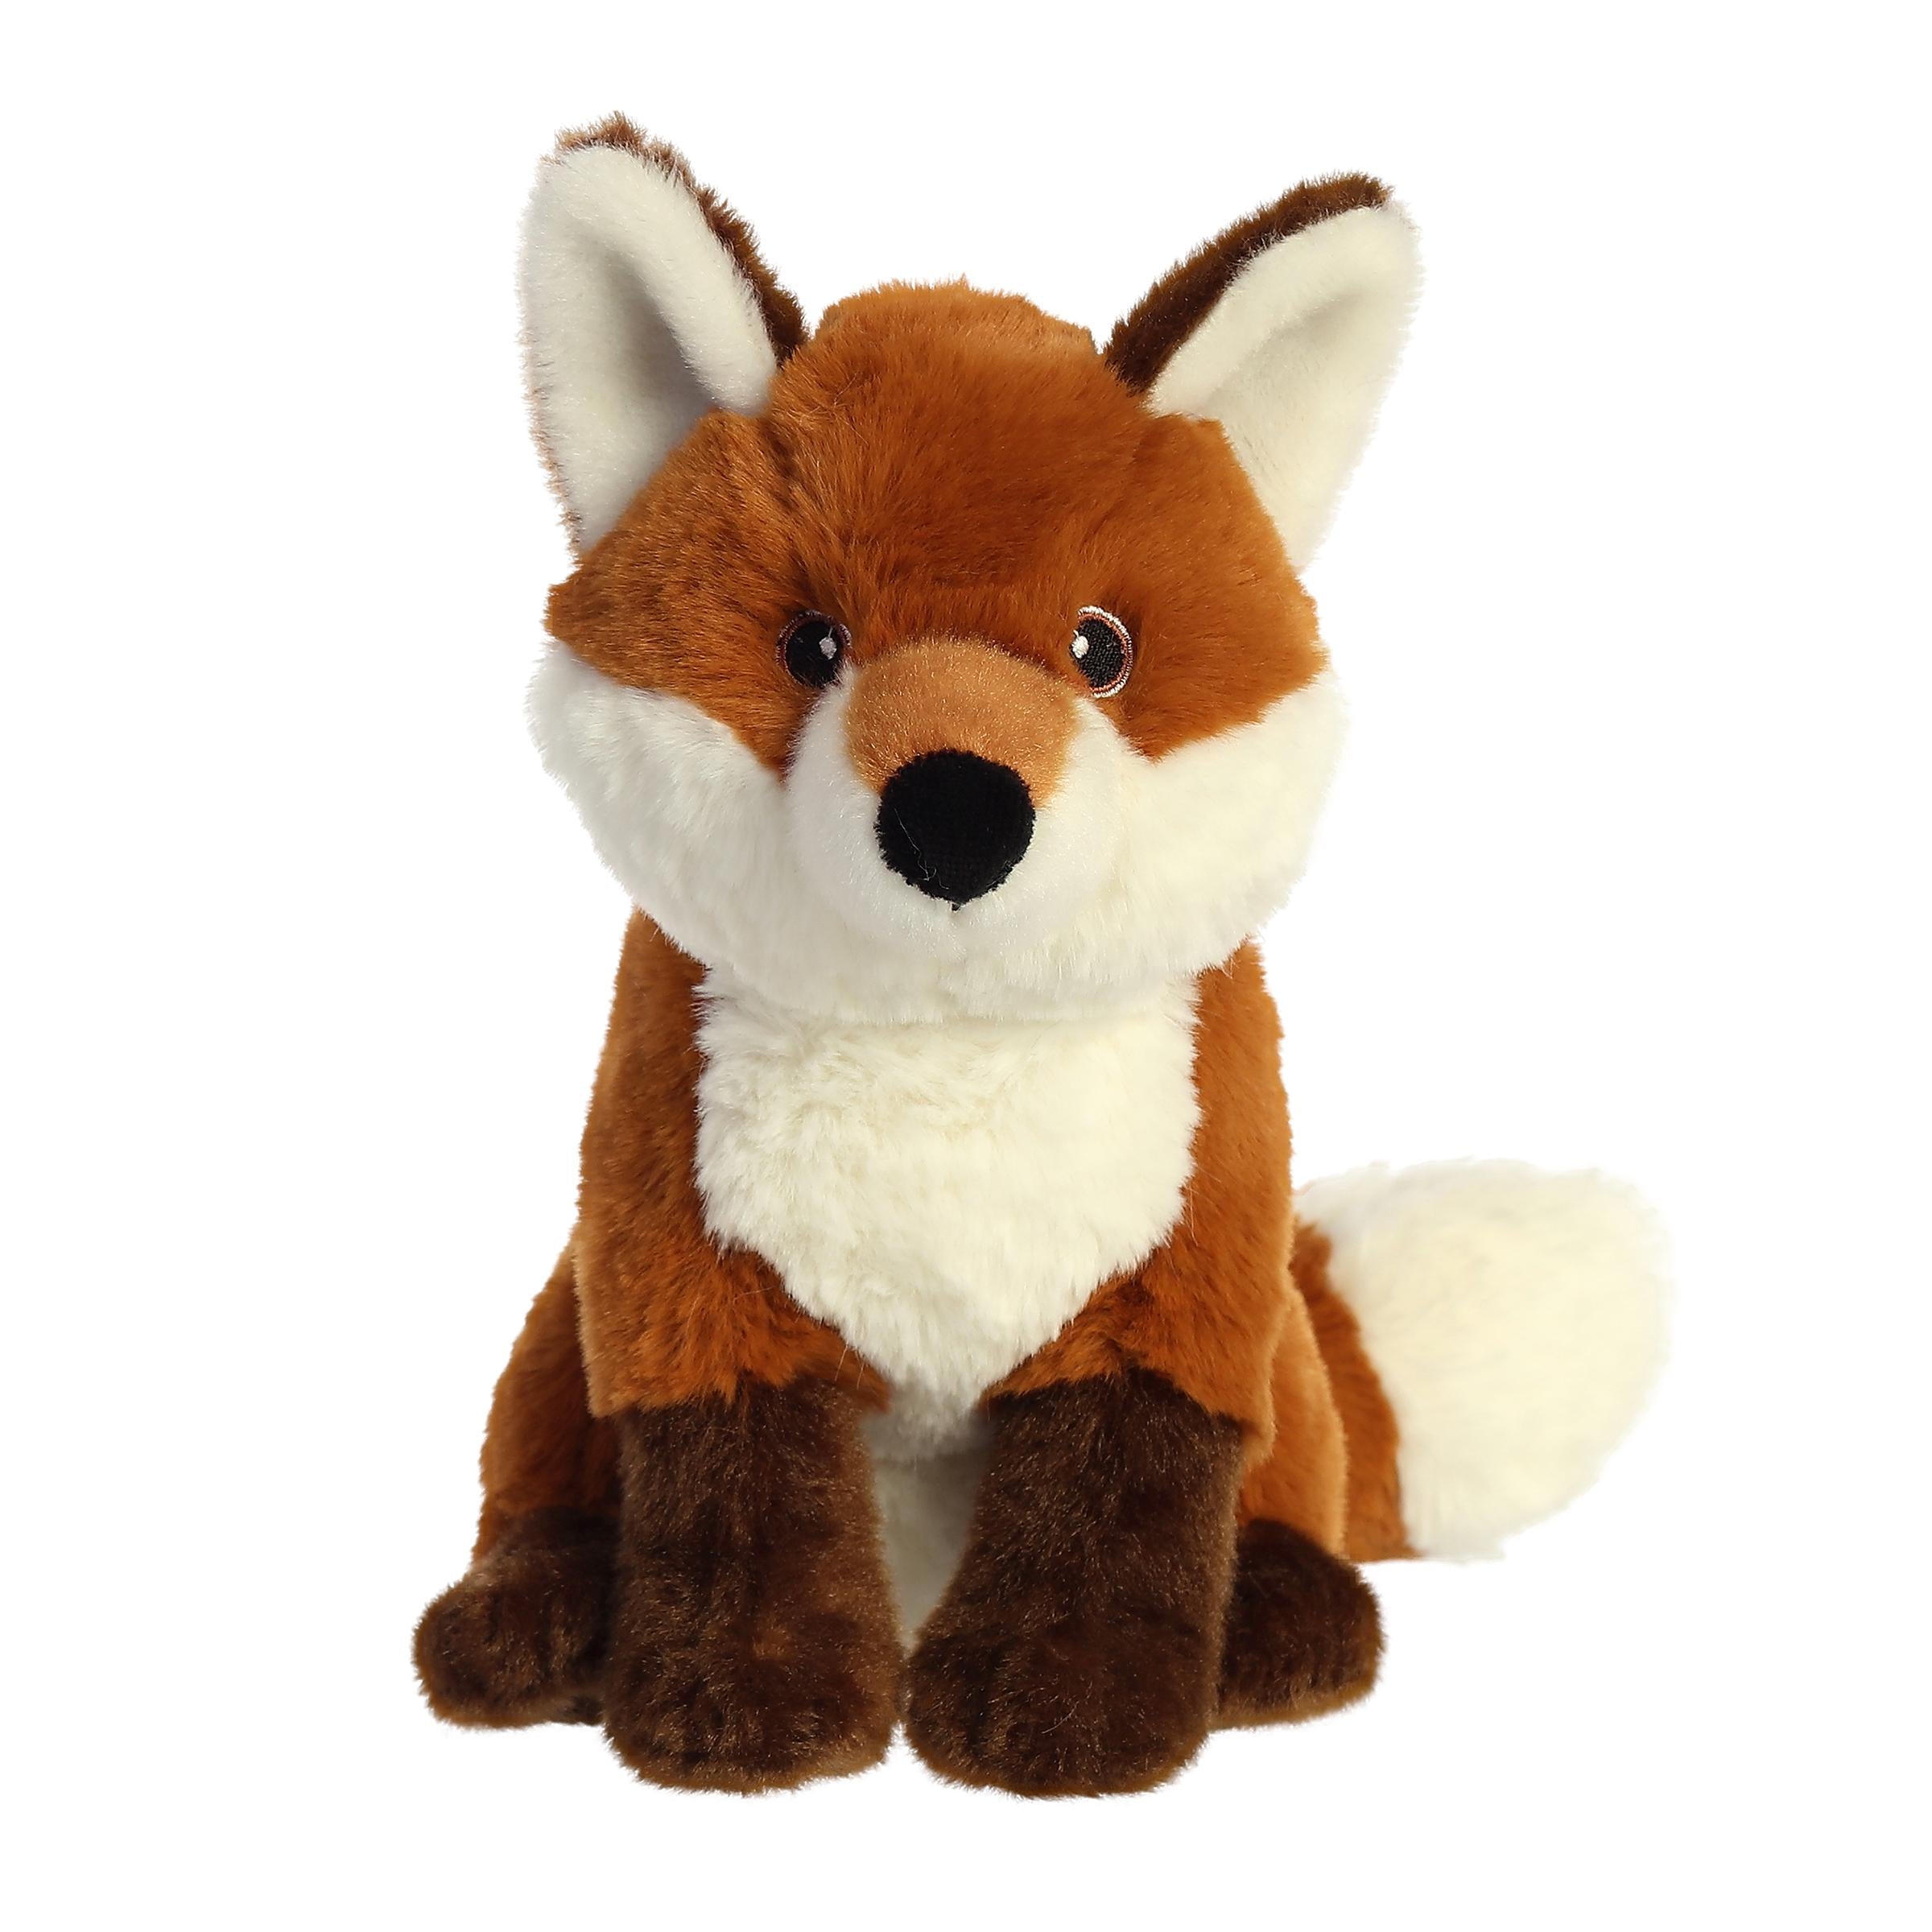 All the foxes get new toys! 